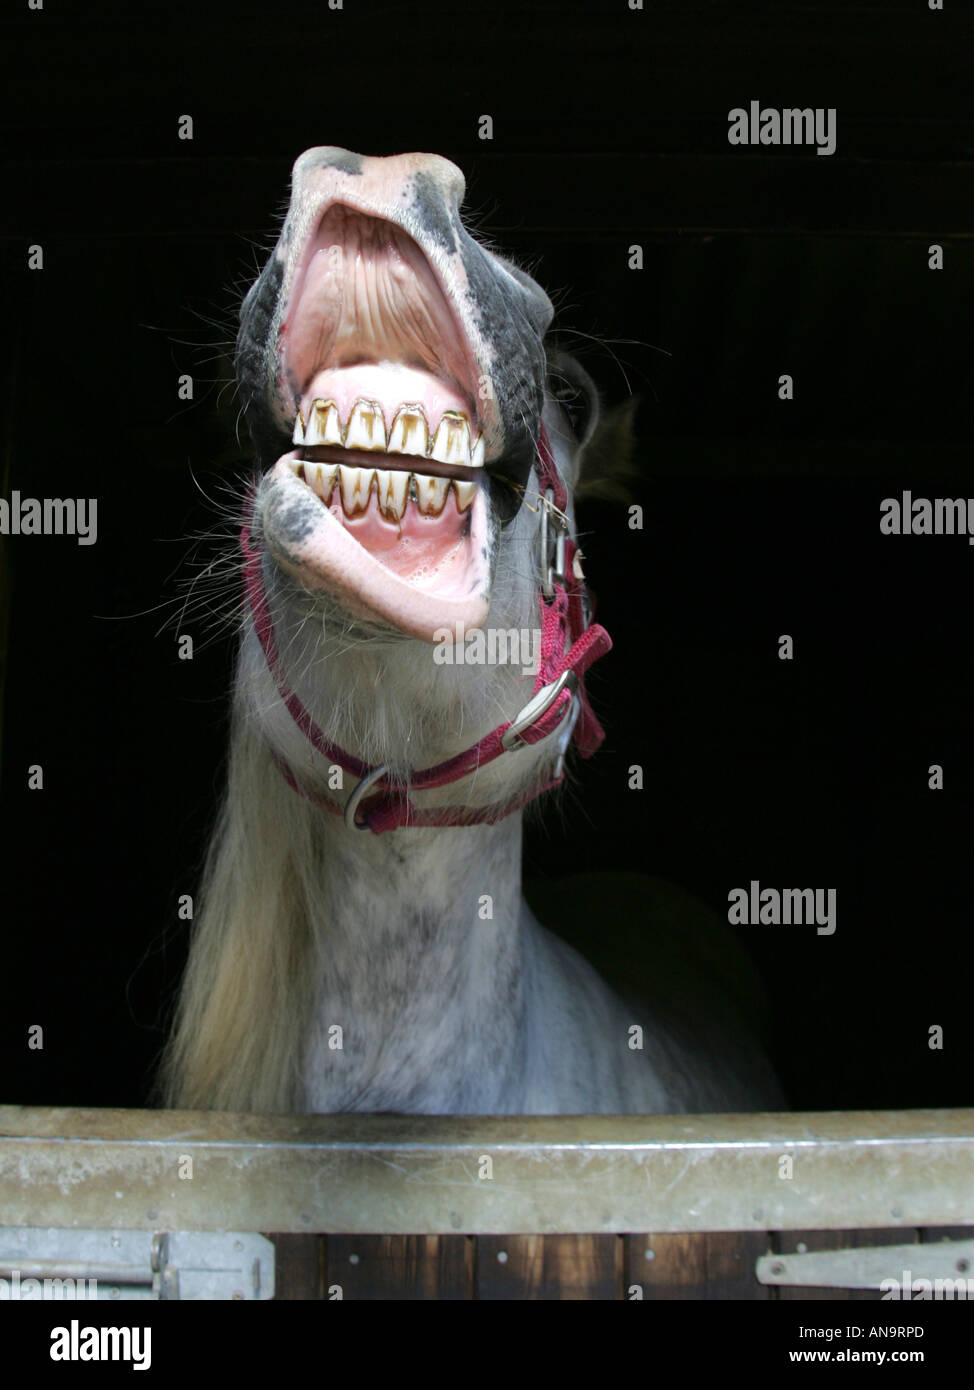 A horse laughing - straight from the horse's mouth. Stock Photo